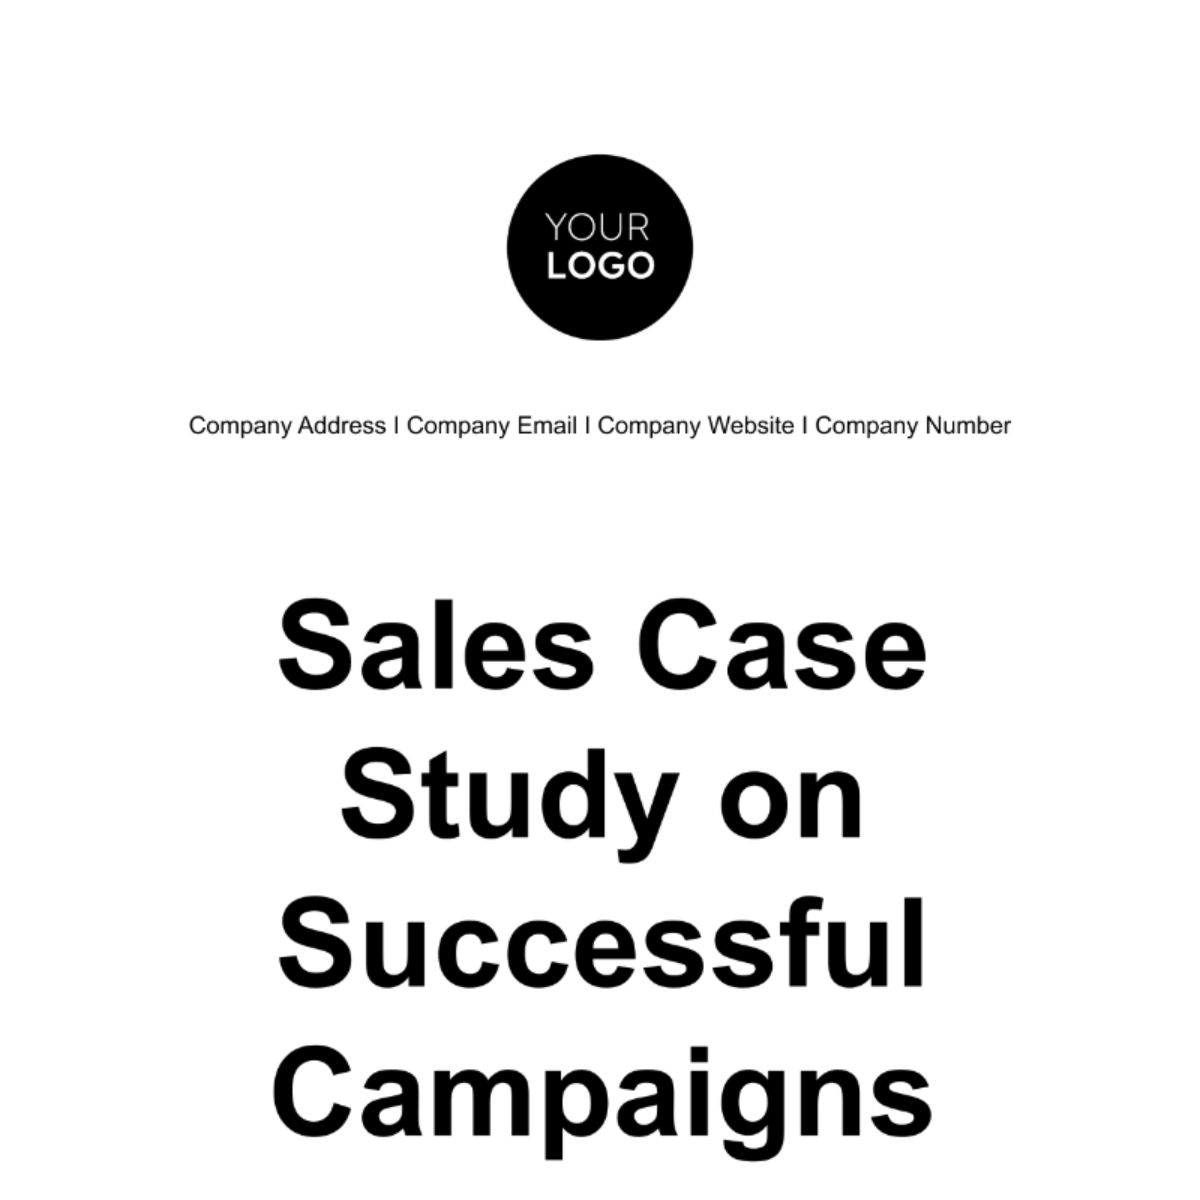 Free Sales Case Study on Successful Campaigns Template